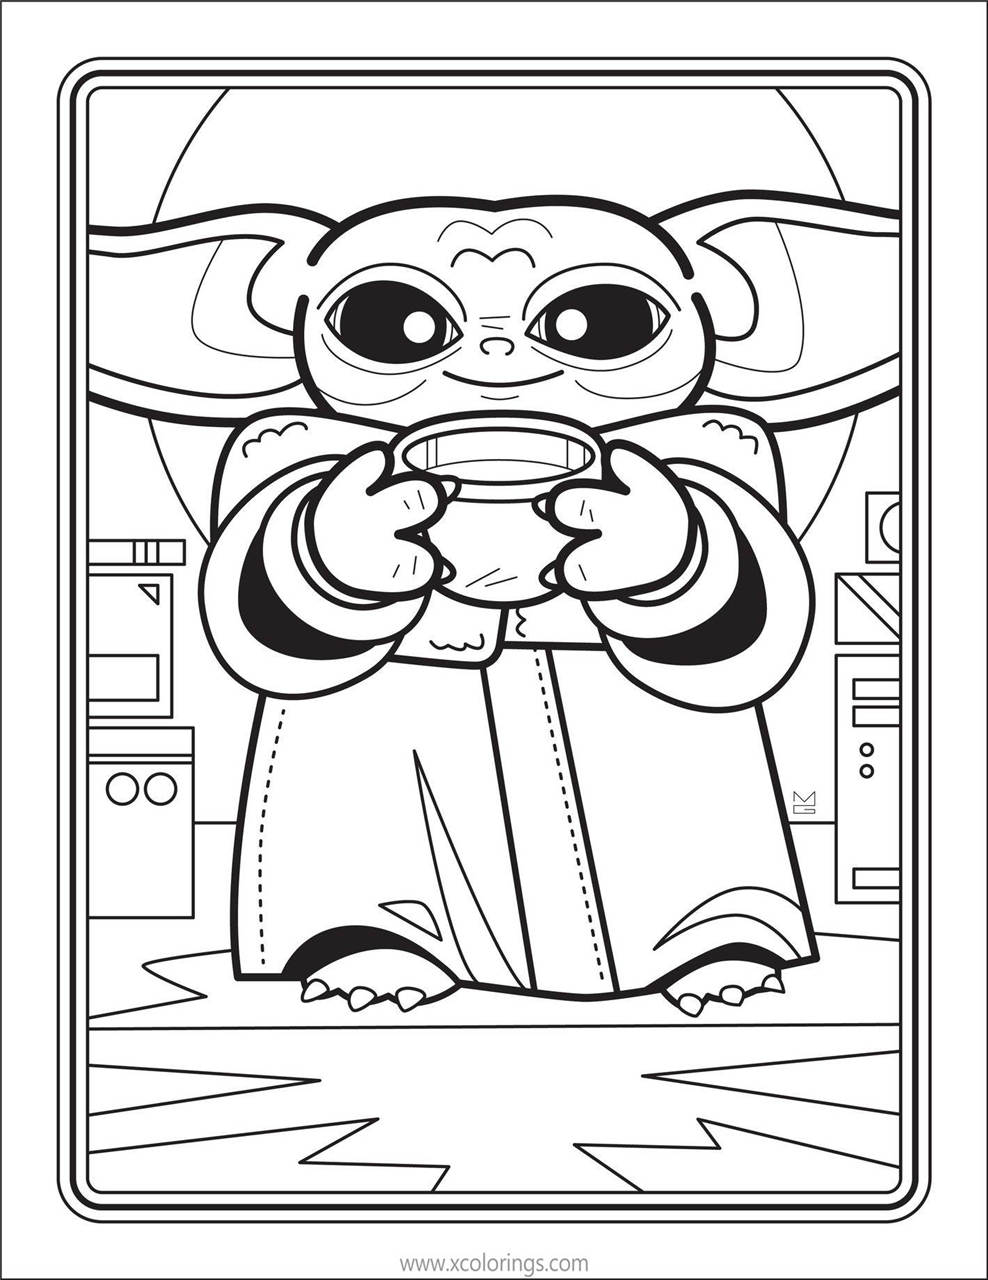 Free Baby Yoda Coloring Pages with A Cup of Drink printable